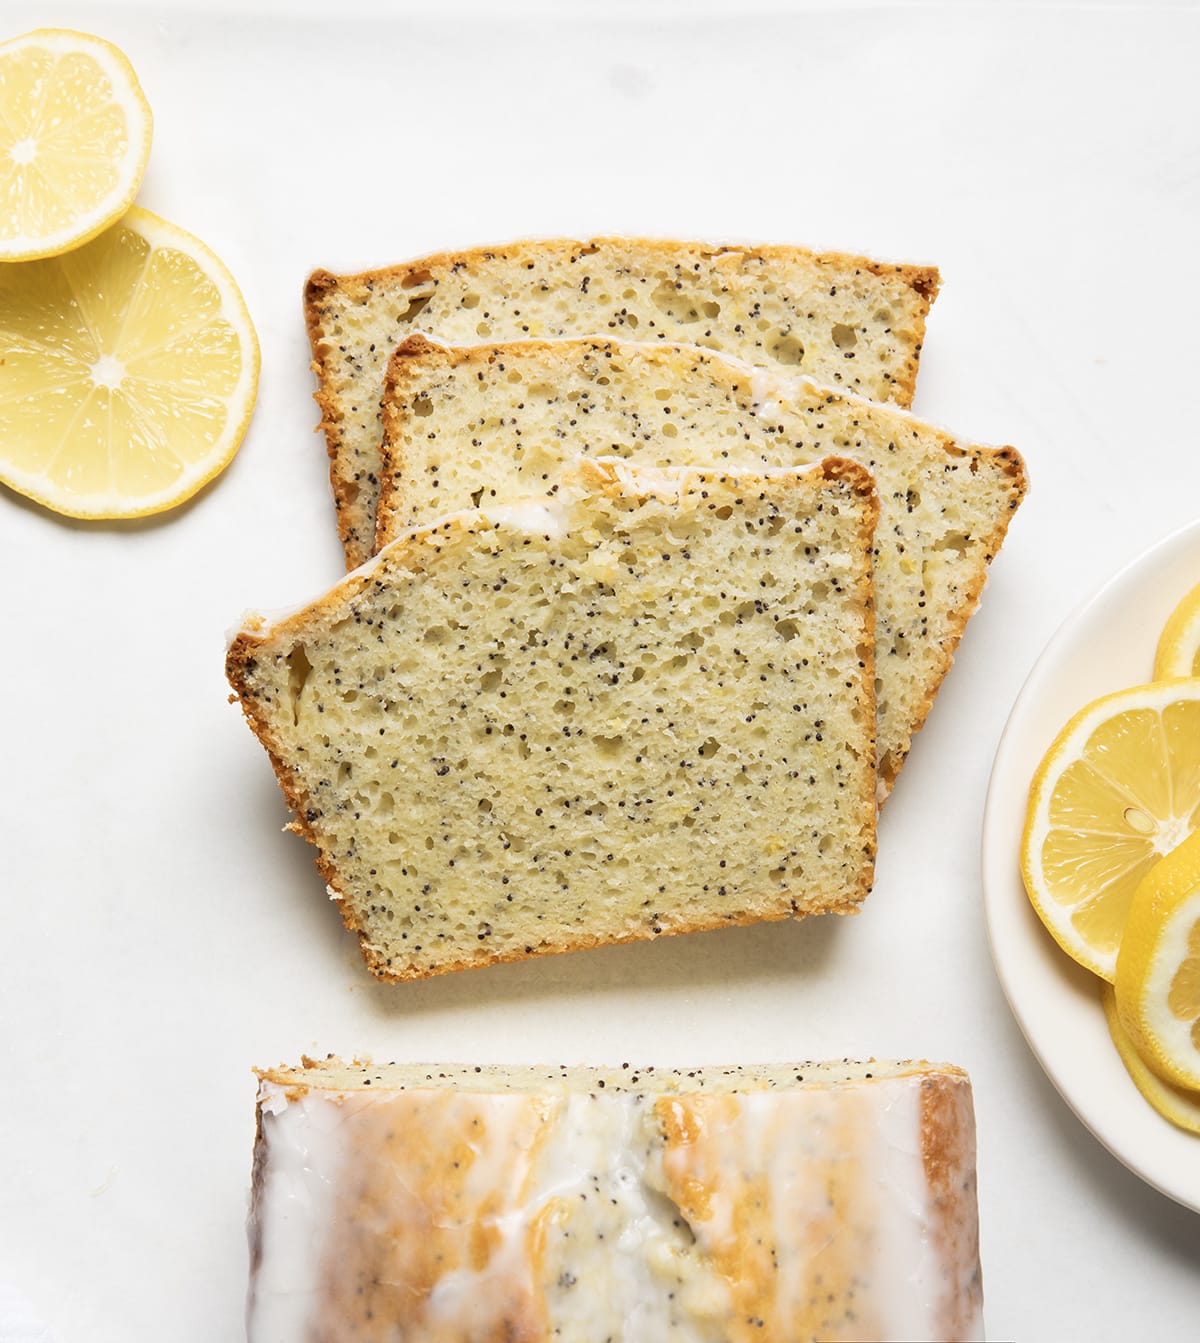 Slices of Lemon Poppy Seed Bread laying flat on a white table next to the loaf from overhead.